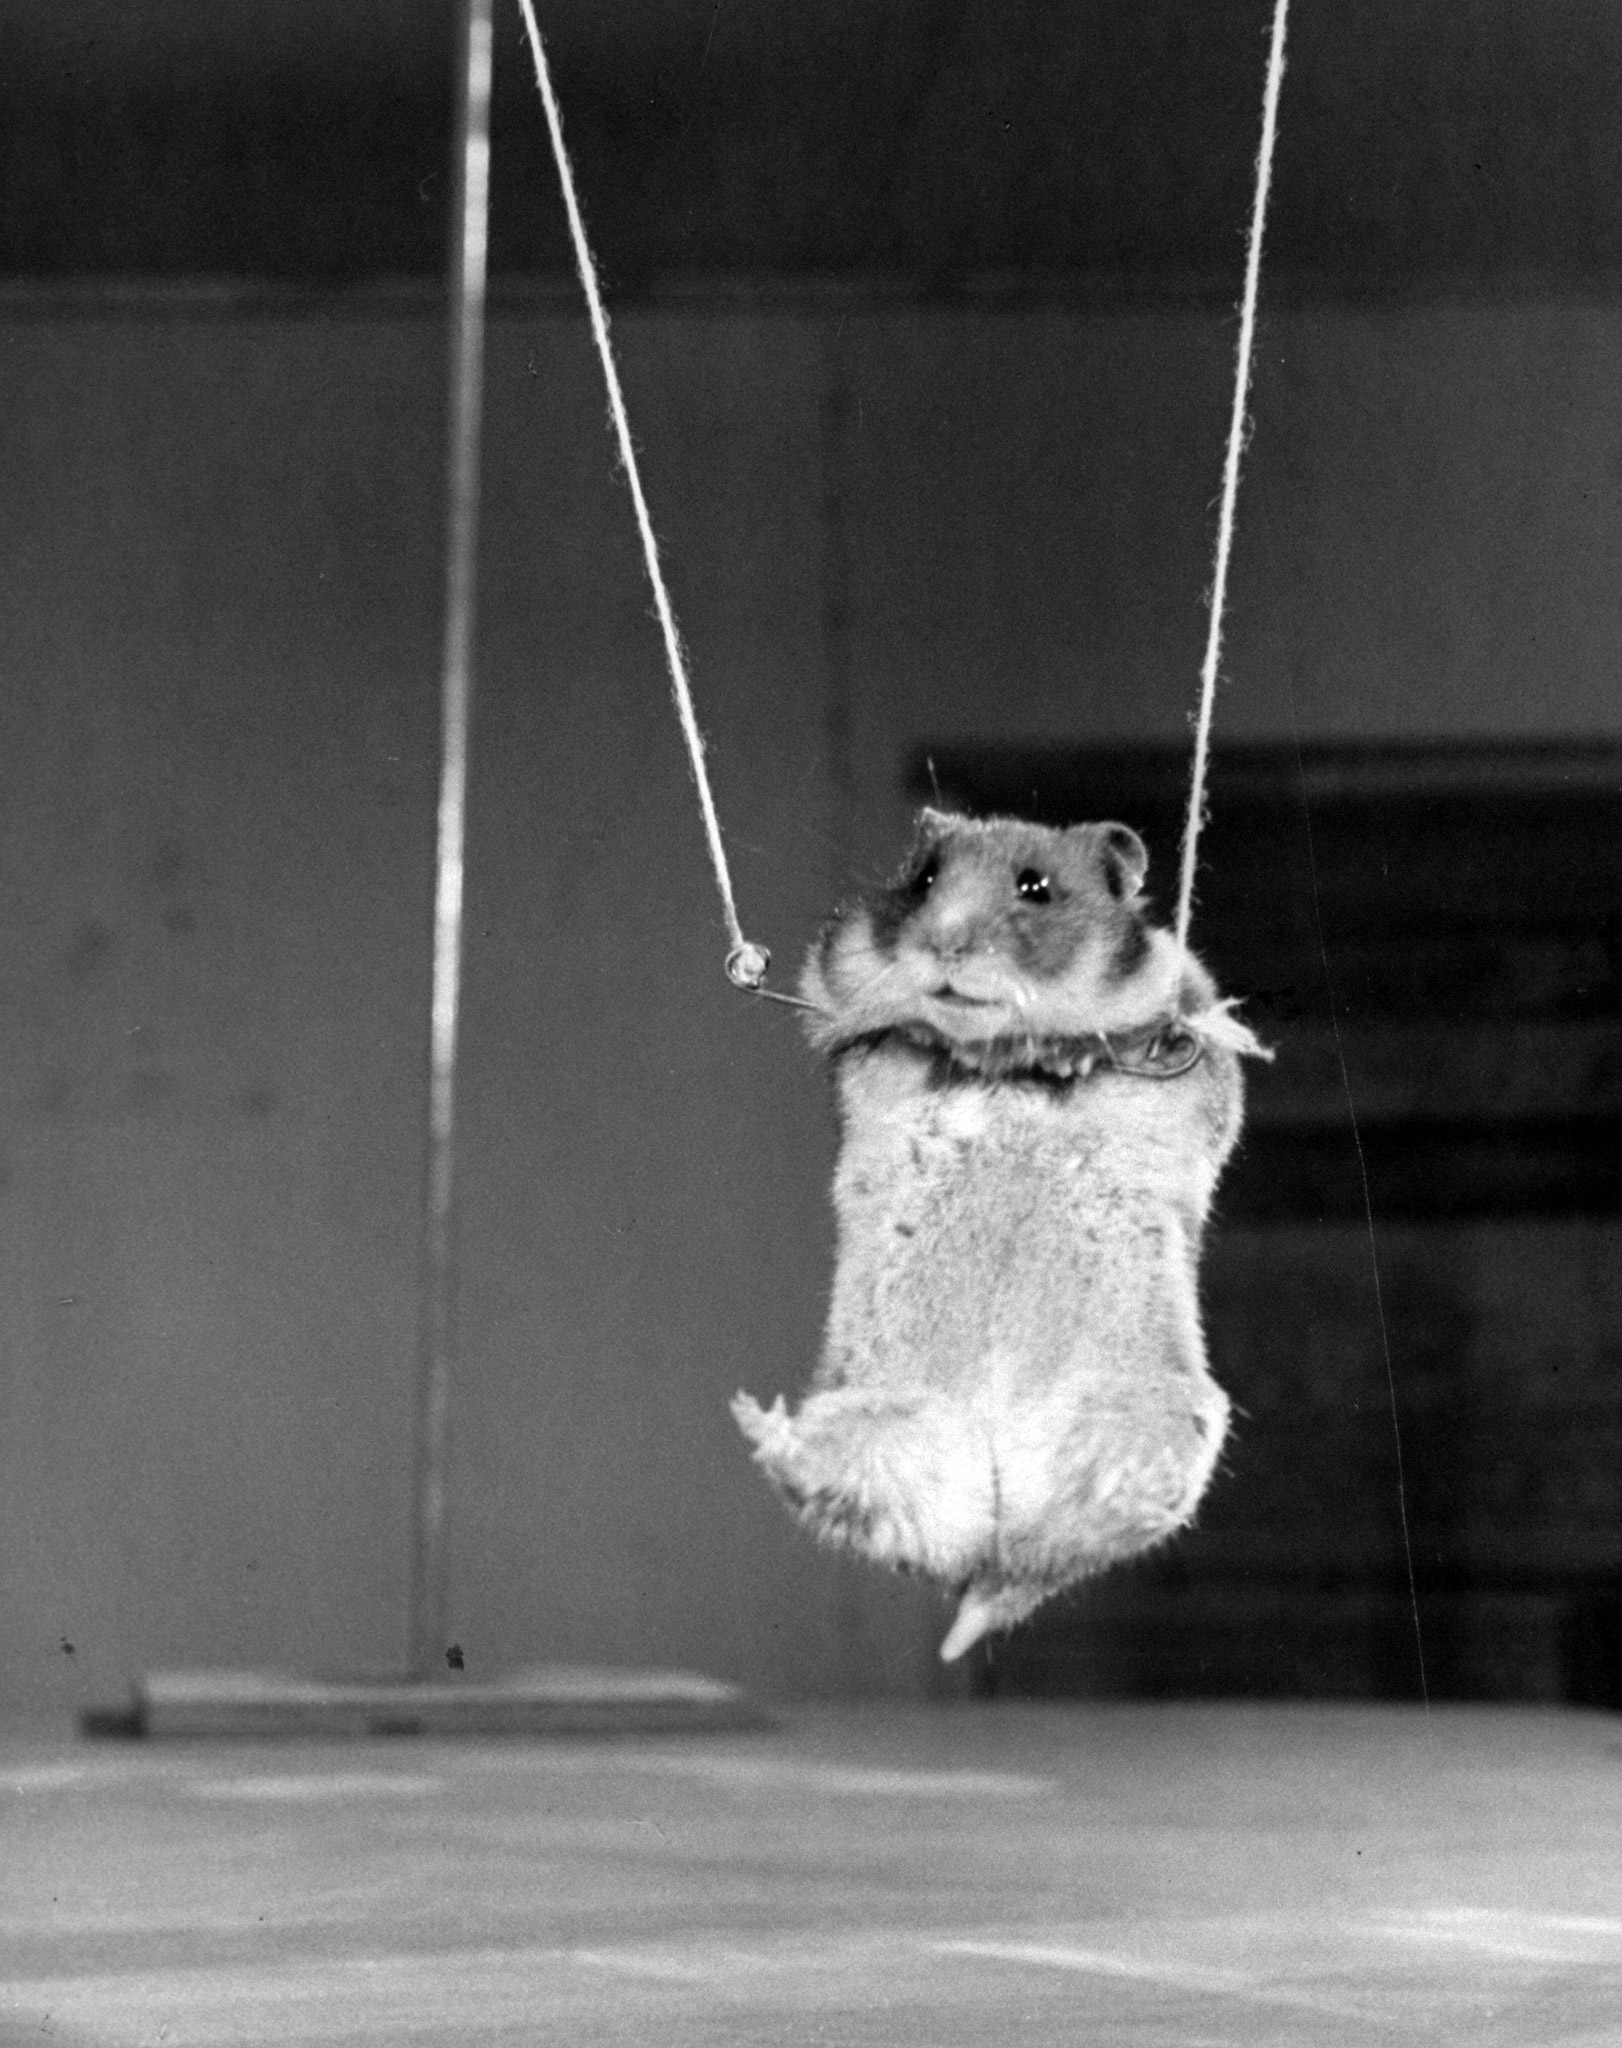 Dangling safely, just above the floor of the cage, the hamster prepares to drop from the trapeze and collect his reward, a food pellet placed in the cage.